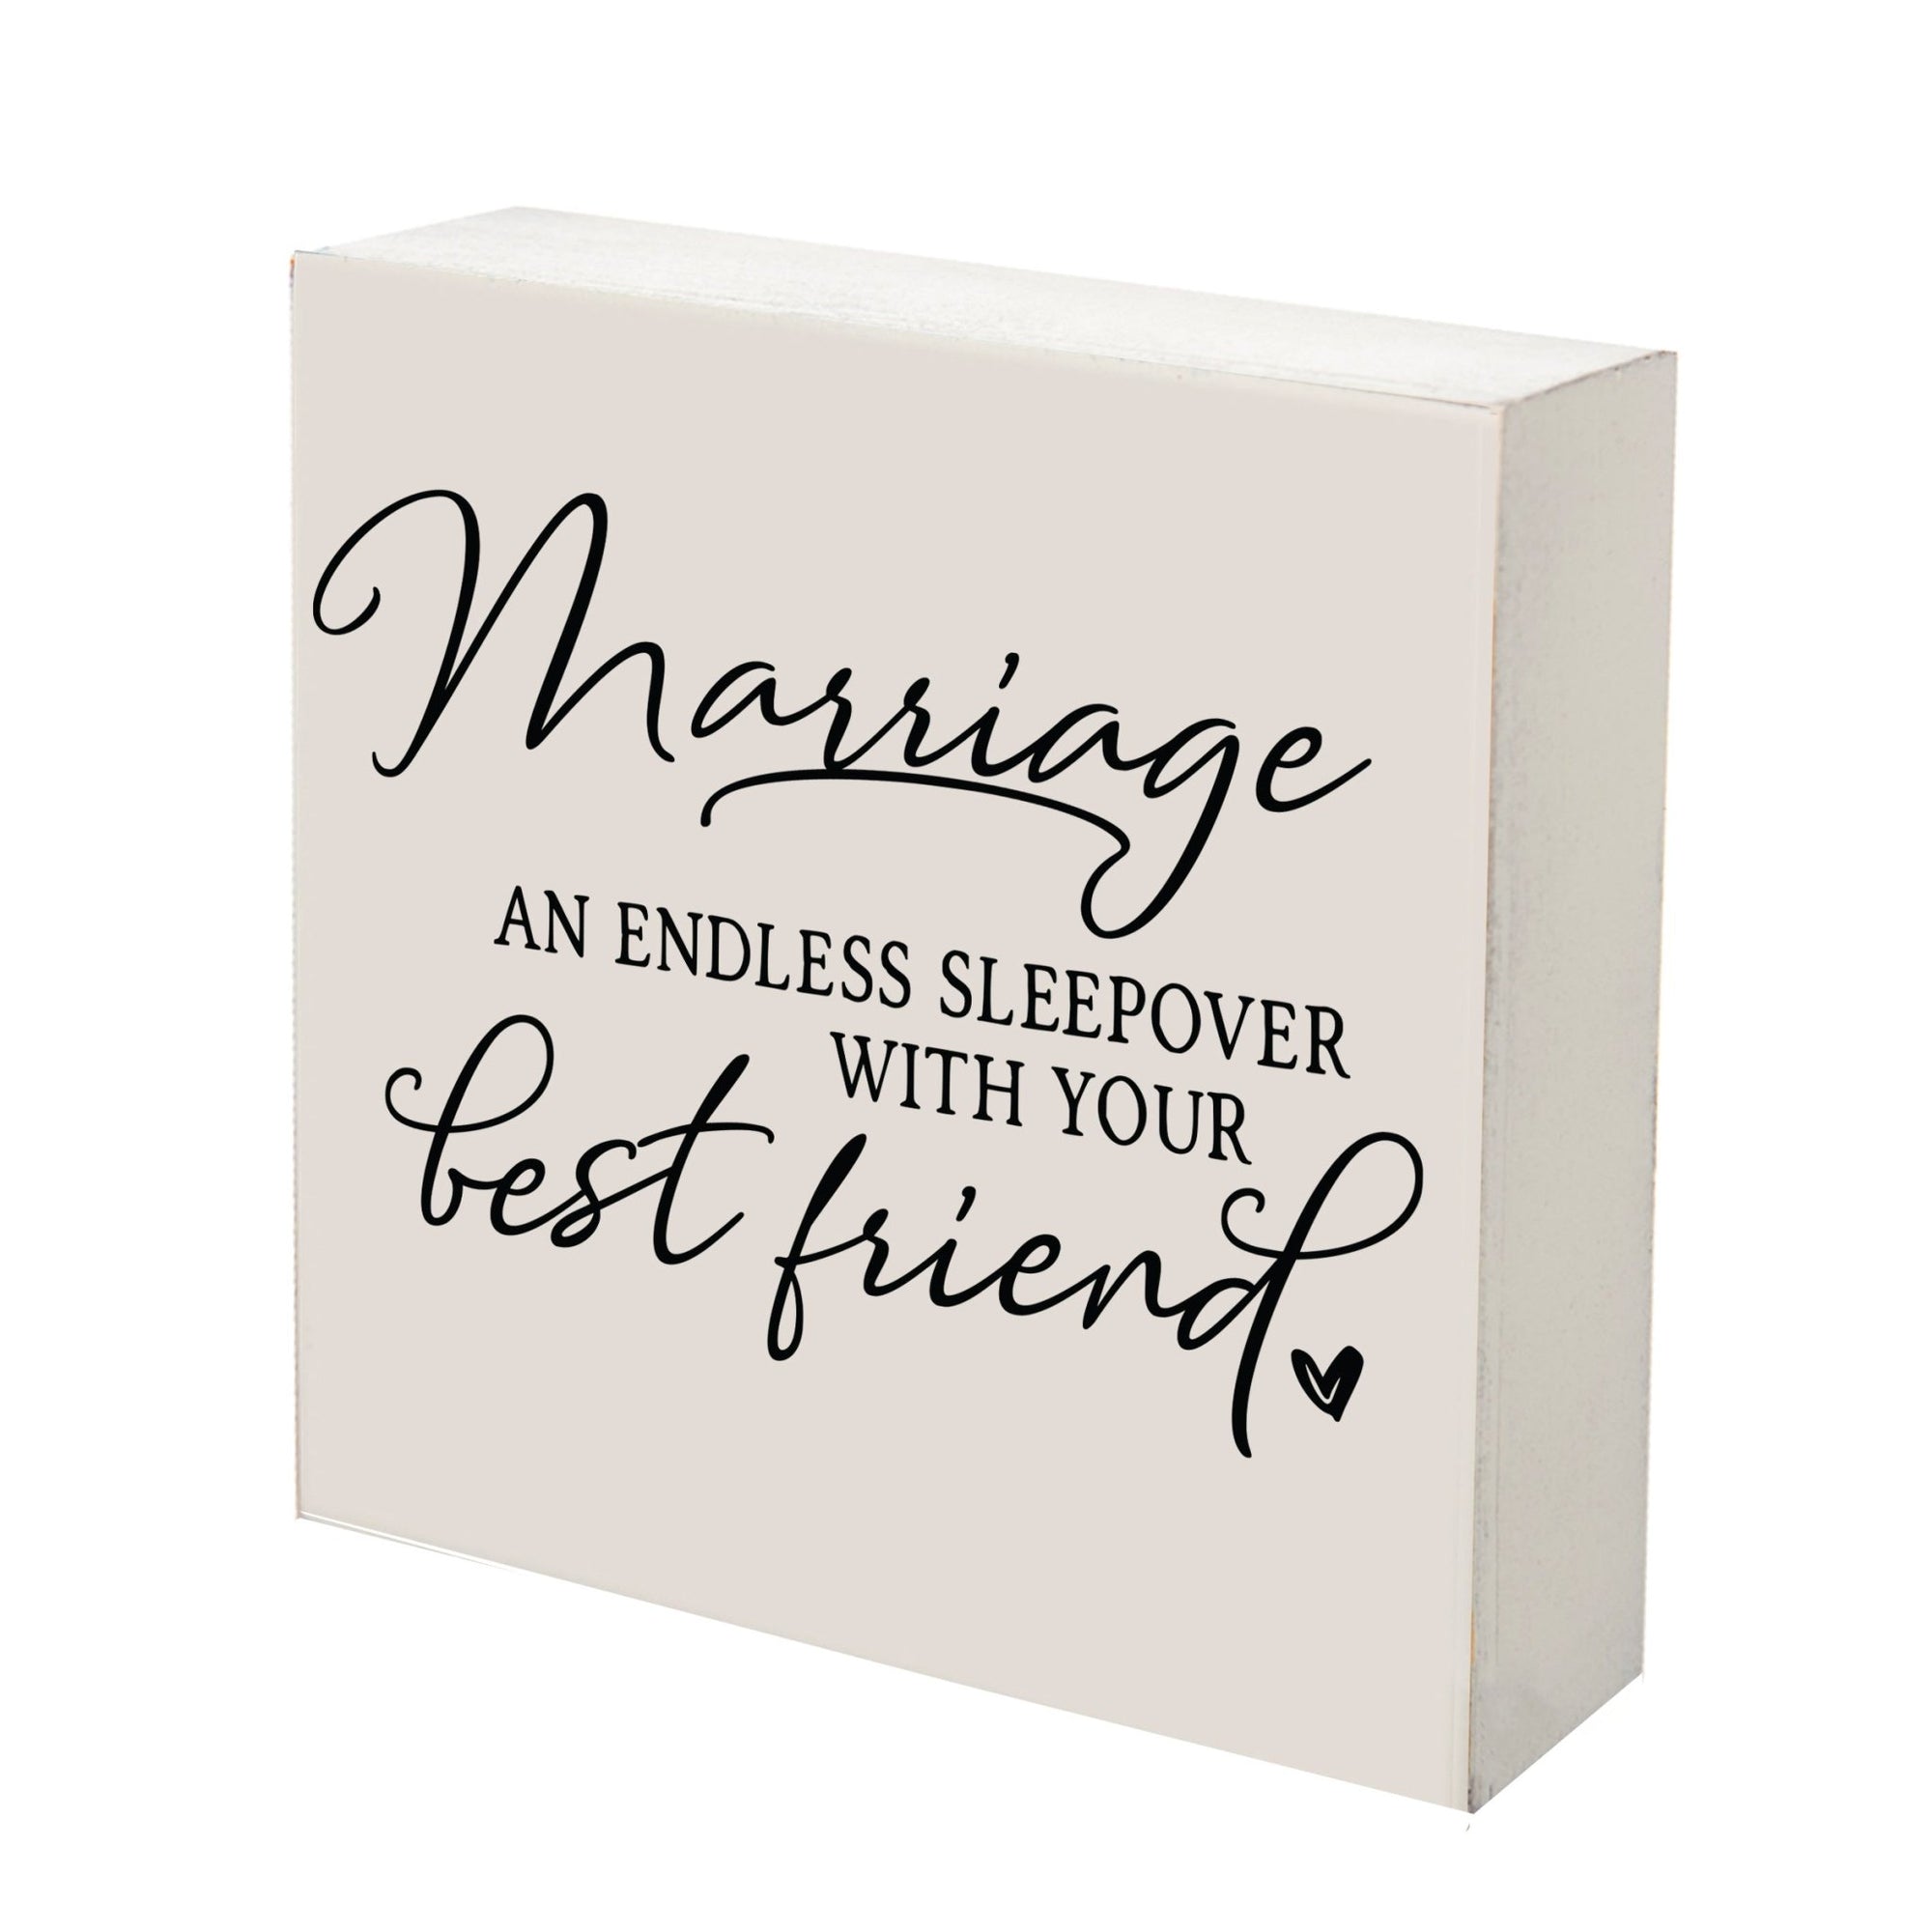 Modern Inspirational Shadow Box for Everyday Home Decorations 6x6 - Marriage An Endless Sleepless - LifeSong Milestones